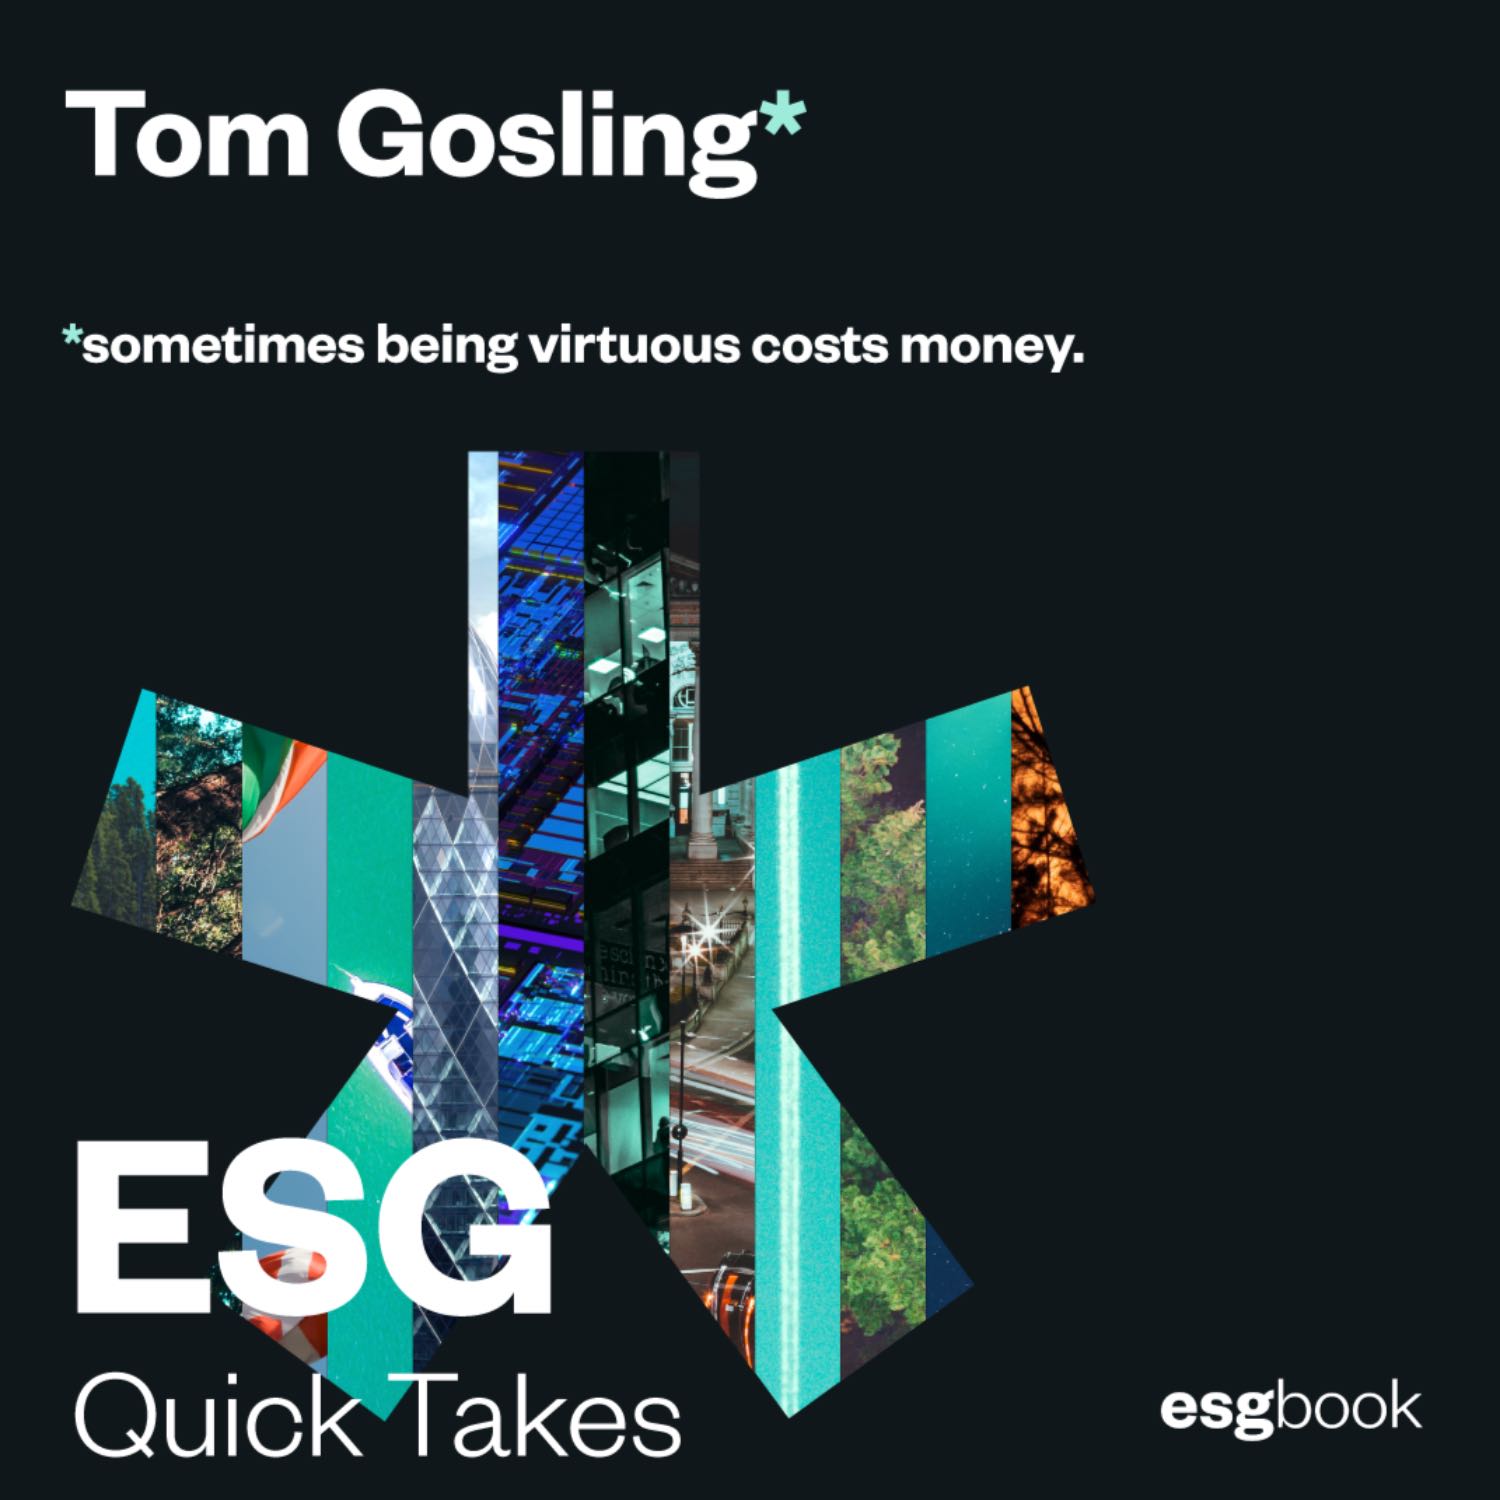 Tom Gosling: sometimes being virtuous costs money